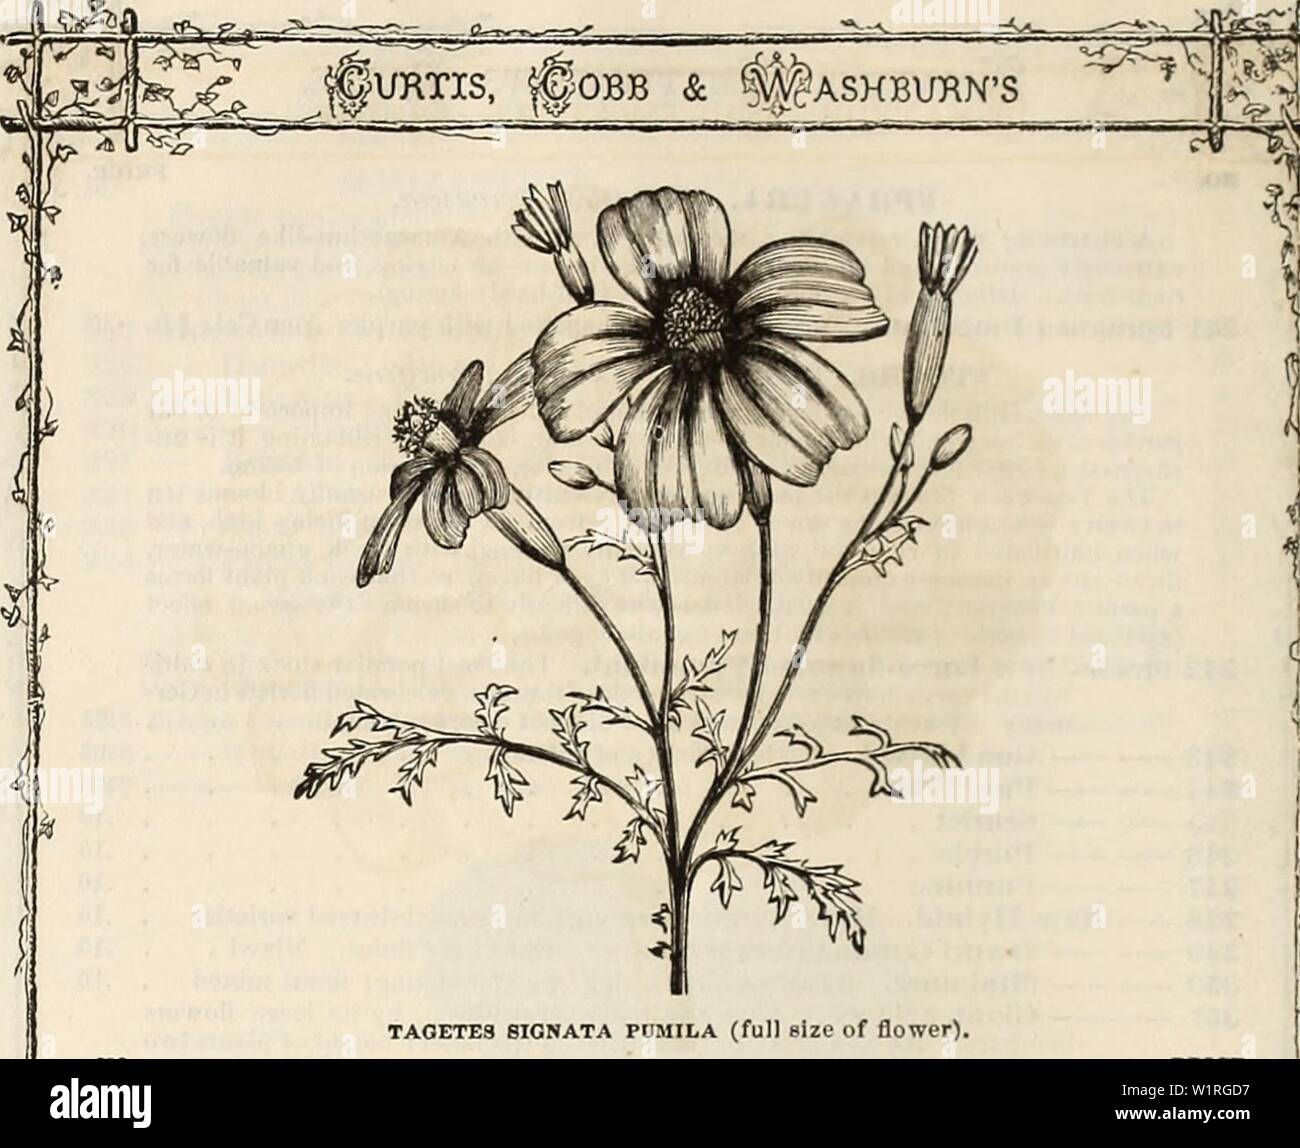 Archive image from page 61 of Curtis, Cobb & Washburn's amateur. Curtis, Cobb & Washburn's amateur cultivator's guide to the flower and kitchen garden for 1878  curtiscobbwashbu1878curt Year: 1878 TA0ETE3 SICNATA PUMILA (full bIzC of flower). KO. PRICE. VENIDIUm. Nat. Ord., Composite. An exceedingly showy plant, with large, handsome flower, having a very gay appearance in beds or borders; thrives best in turfy loam. Half-hardy annual. 354 Yenidium Calendulaceum. Deep orange; rich brown centre. 1 foot . . .10 VENUS'S LOOKING-GLASS. Nat. Ord., Campanulacea. A free-flowering, pretty little plant, Stock Photo